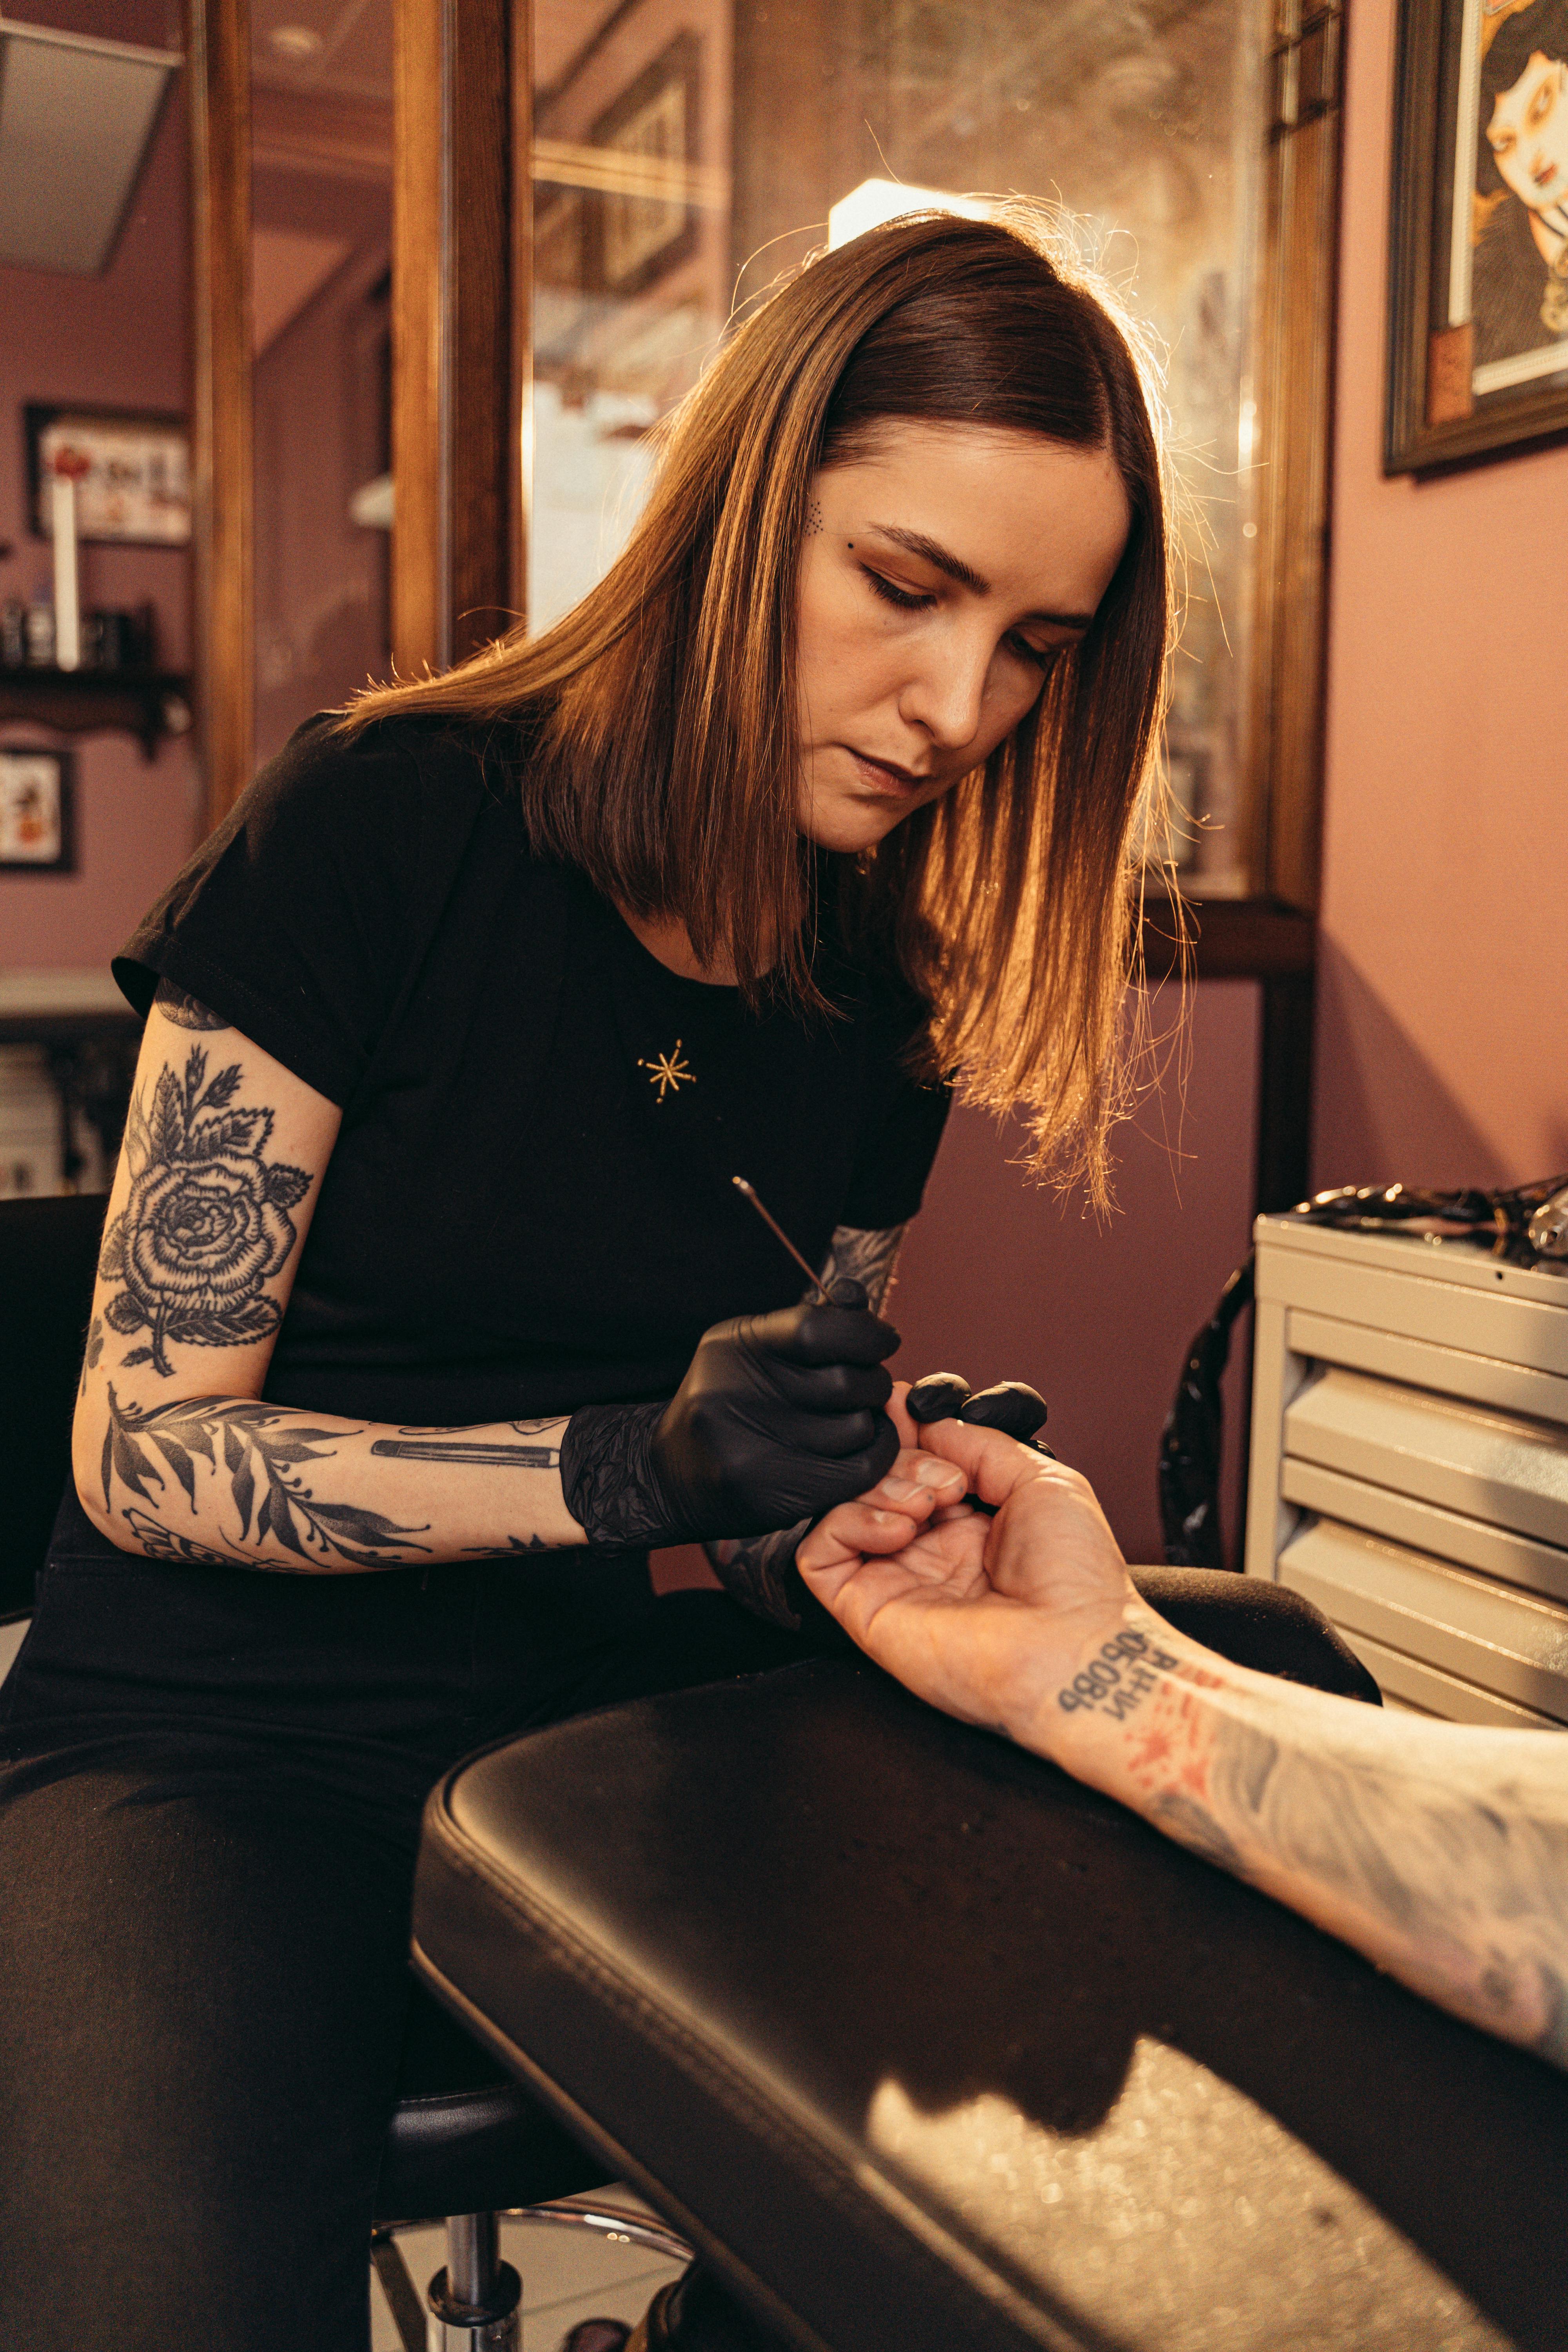 Tattoo Artist at work | NY Tattoo Convention 2014. If I have… | Flickr